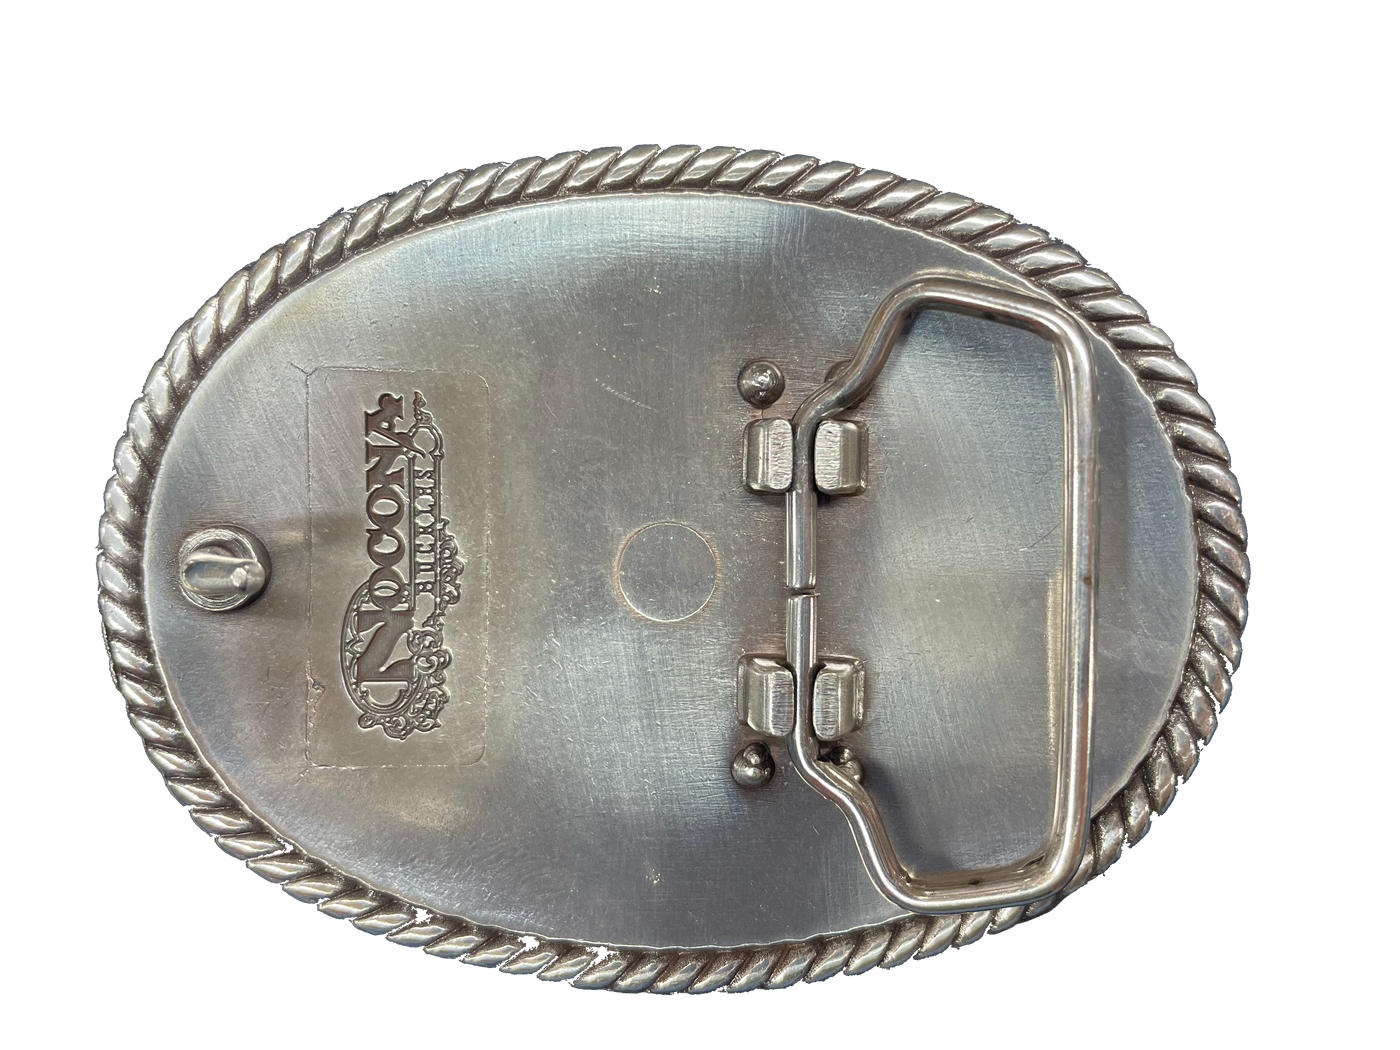 This oval shaped buckle by Nocona has a rope design around the border. It is chrome colored with scroll design etched appearance on surface.  Measures 2 3/4" tall by 3 3/4" wide and fits belts up to 1 1/2" wide.  It is available for purchase in our retail shop in Smyrna, TN, just outside Nashville and also on our online store. Made in Taiwan. Back of buckle pictured.